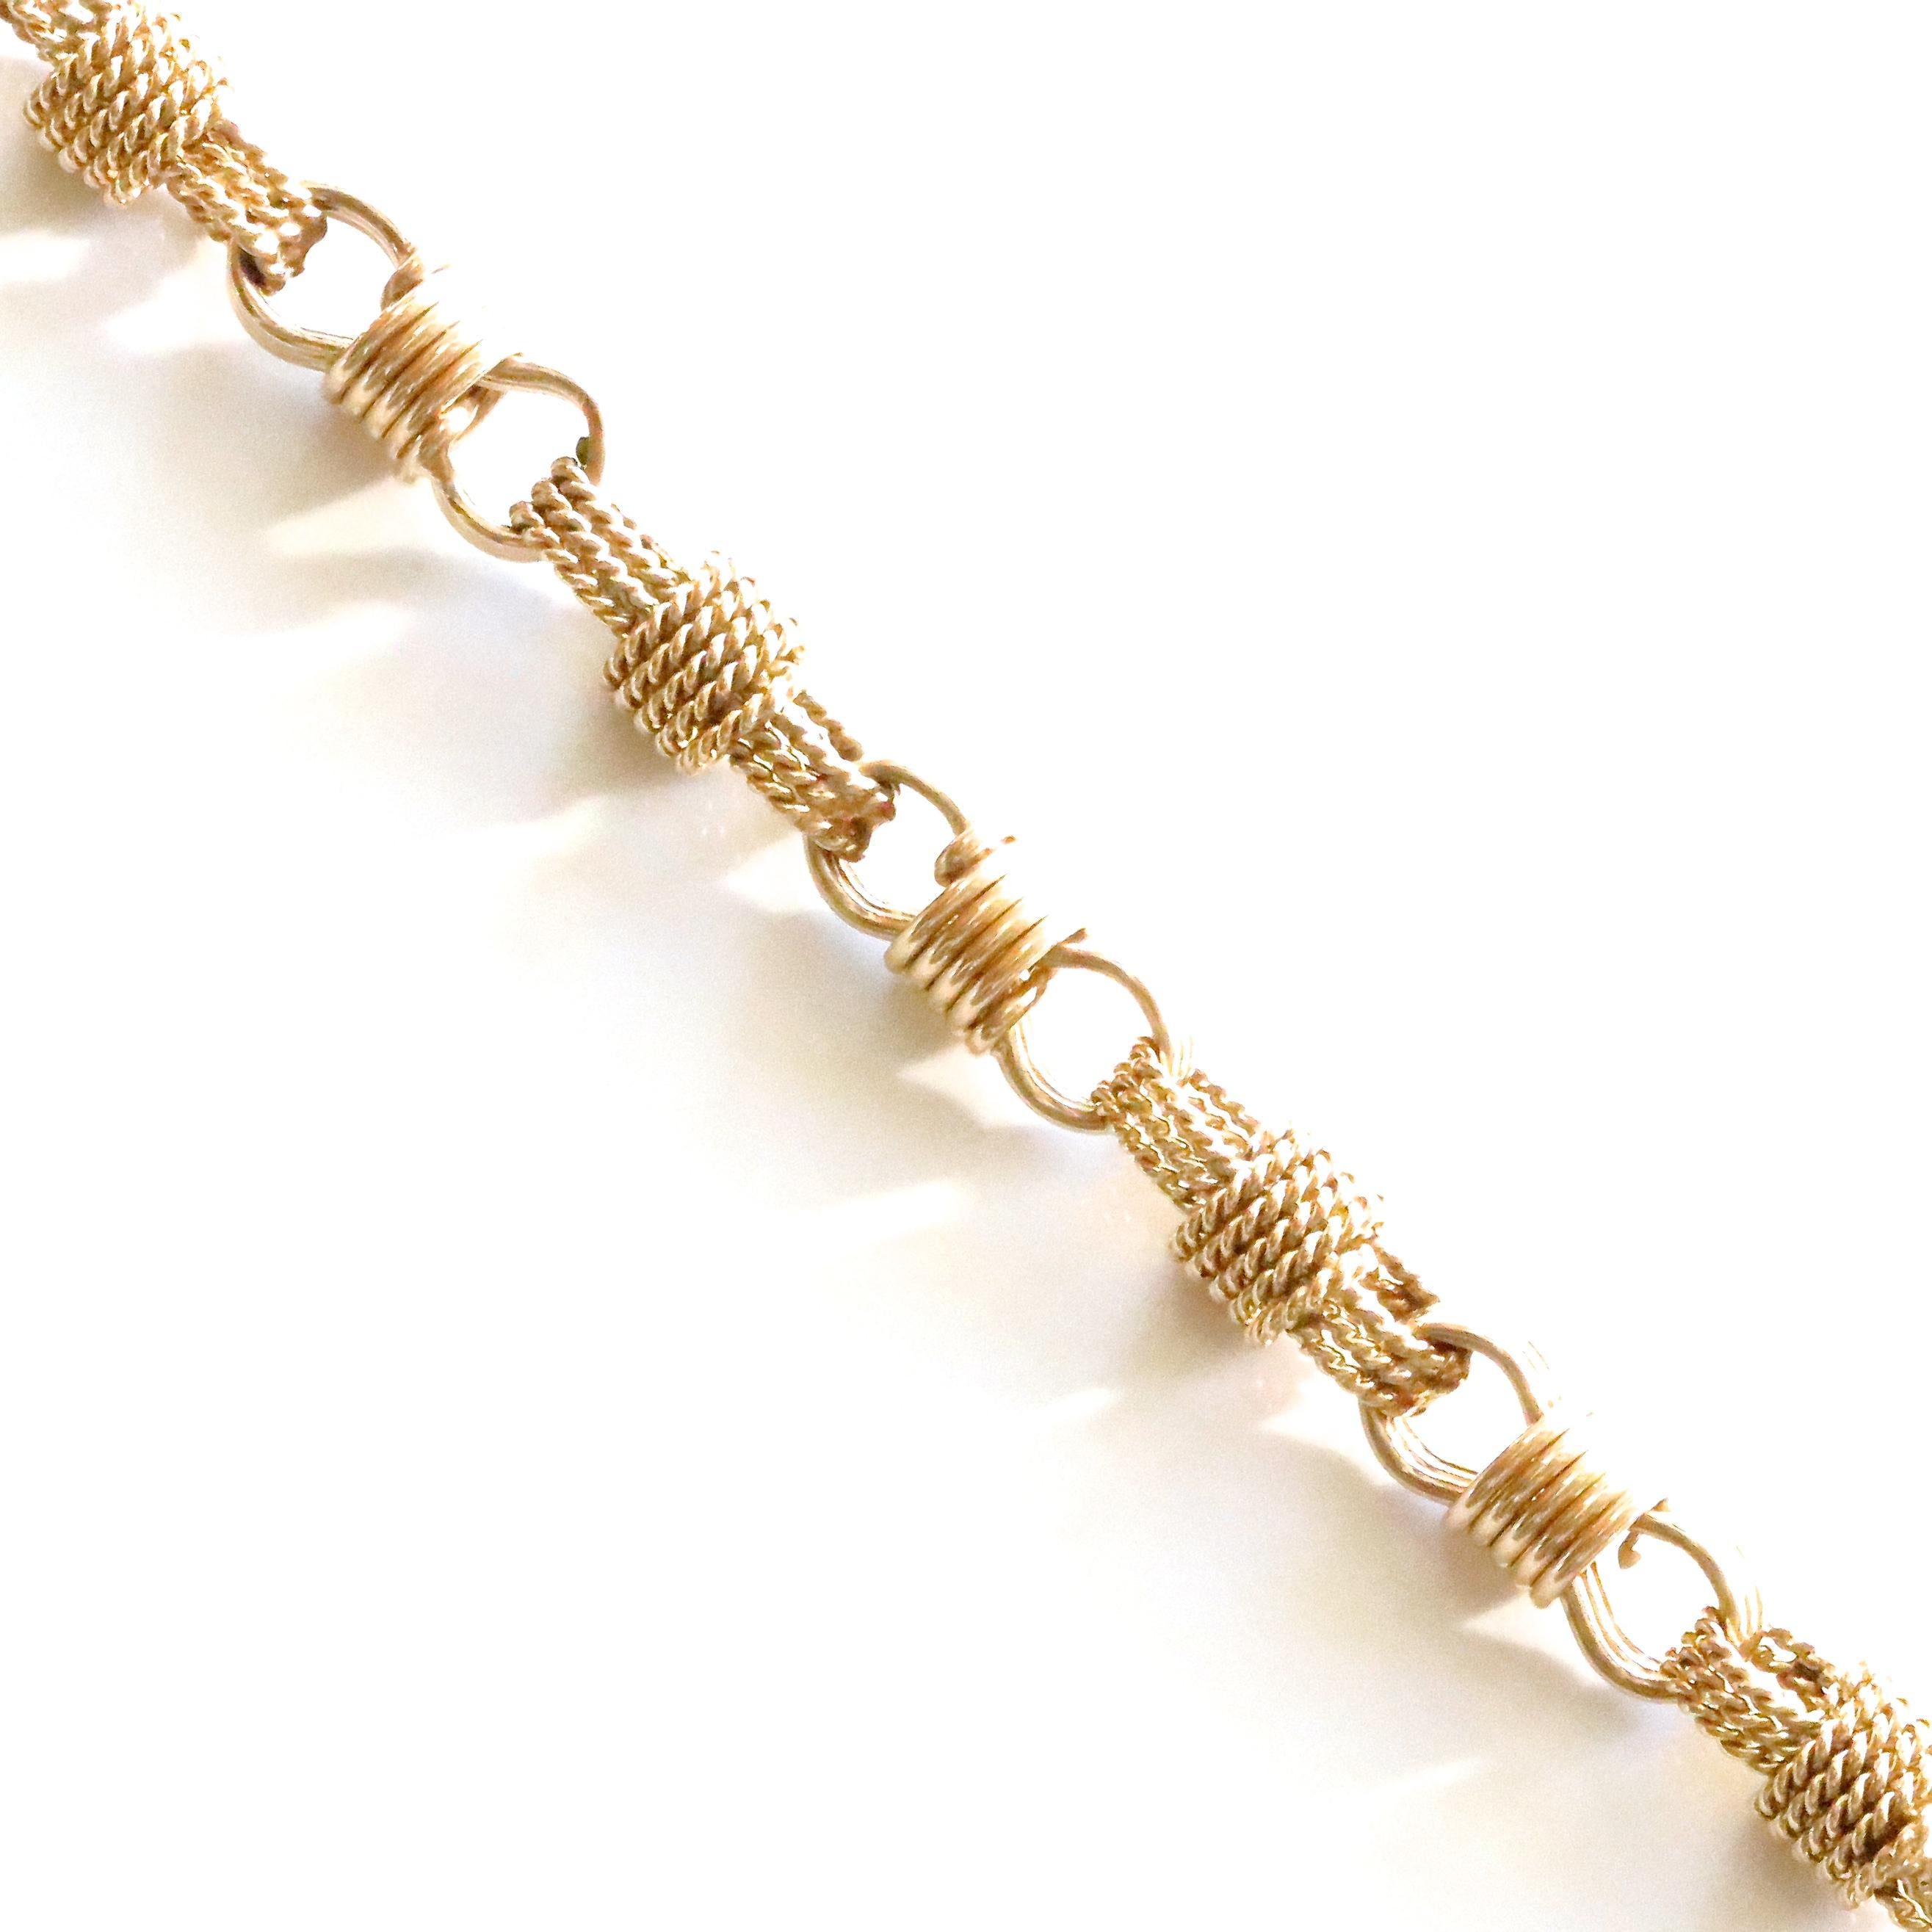 Substantial, bold solid gold bracelets are the hottest trend of this year. Wear this bracelet with an all-black outfit for a dramatic accent or with neutral tones to complete your look. The solid gold looks unique due to the unusual braided